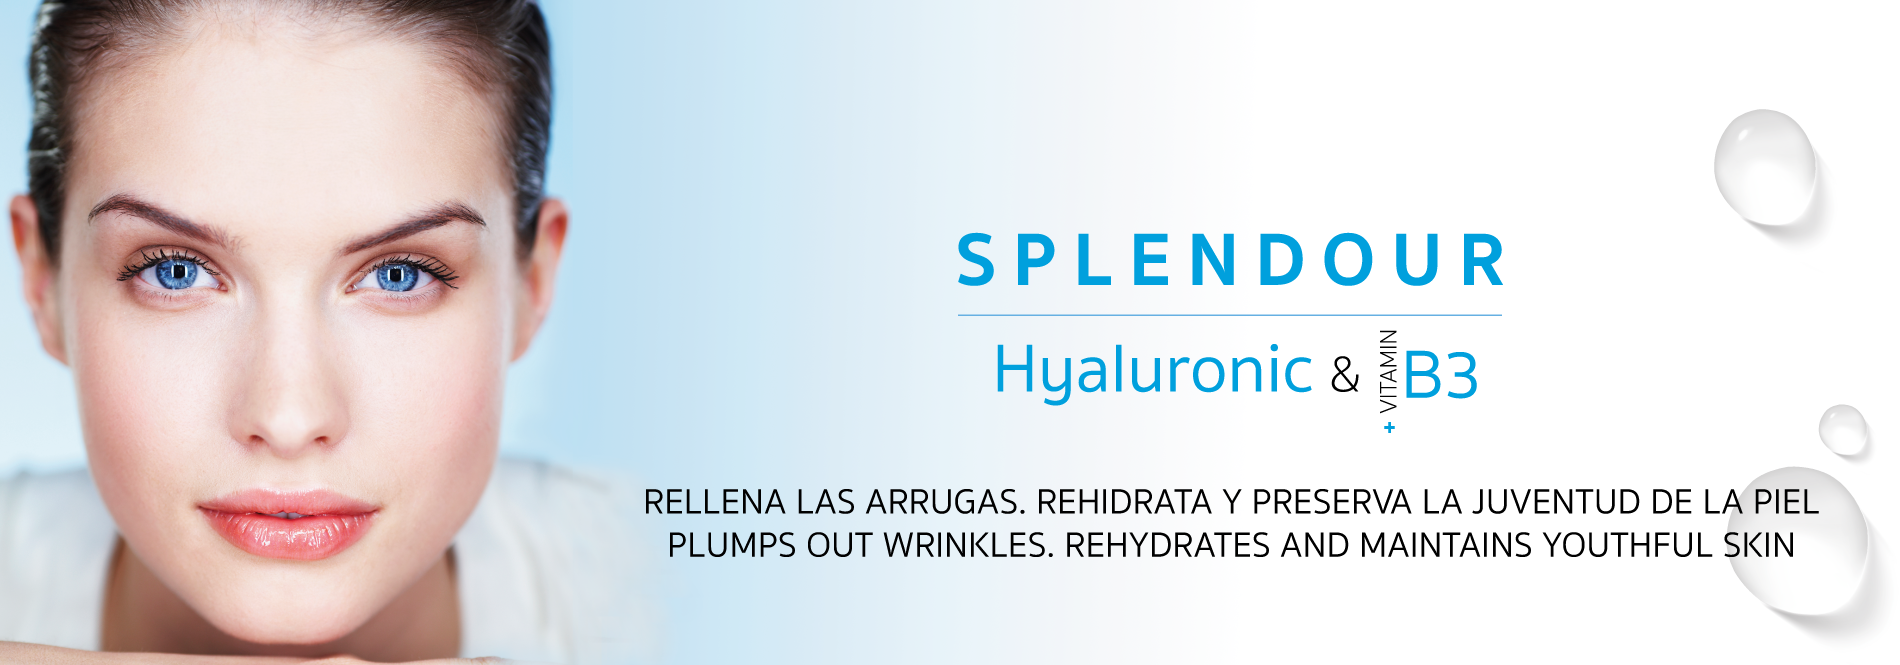 SPLENDOUR <p style="text-align: center;"><strong>PLUMPS OUT WRINKLES. REHYDRATES AND MAINTAINS YOUTHFUL SKIN</strong></p>
<p style="text-align: center;">&nbsp;</p>
<p style="text-align: center;">Extraordinary anti-ageing line with high redensifying and moisturising effect thanks to powerful formulas that<br />combine the synergies of two cosmetic active ingredients: hyaluronic acid (high, medium and low molecular<br />weight) and vitamin B3. The skin maintains its natural youthfulness, looking smooth and radiant once more.</p>
<p style="text-align: center;">In all its splendour.</p>